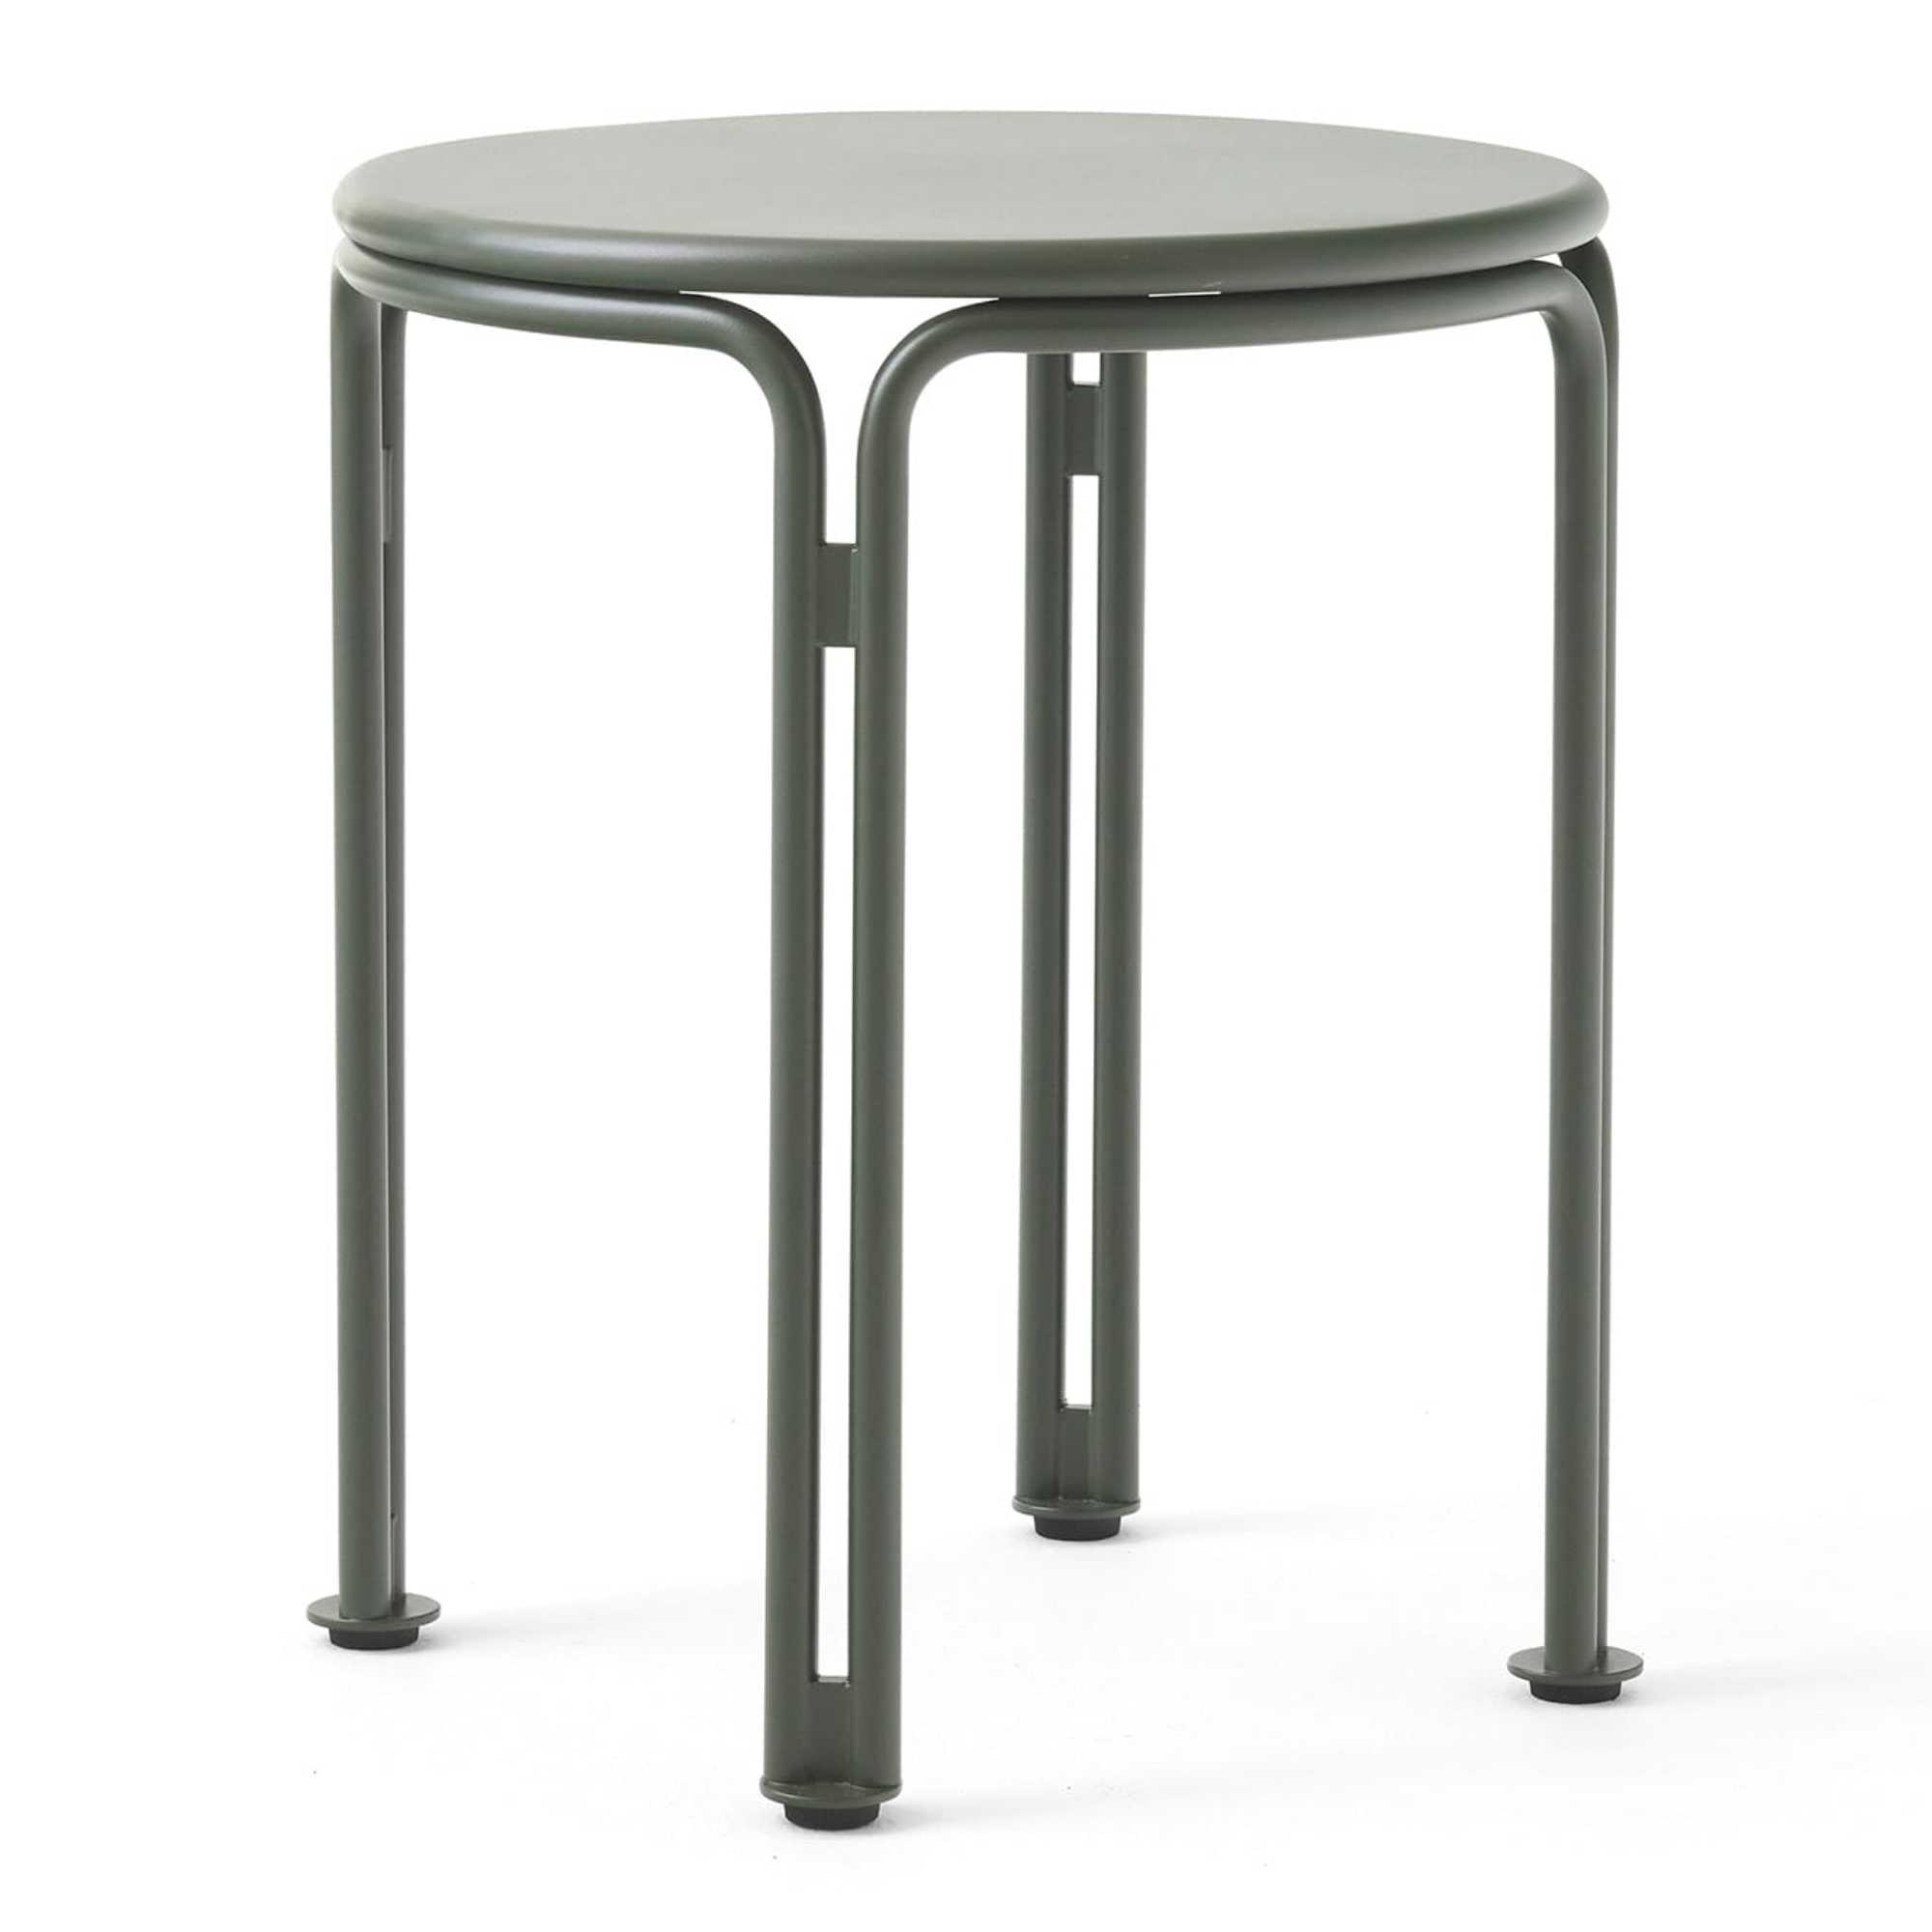 Thorvald SC102 side table